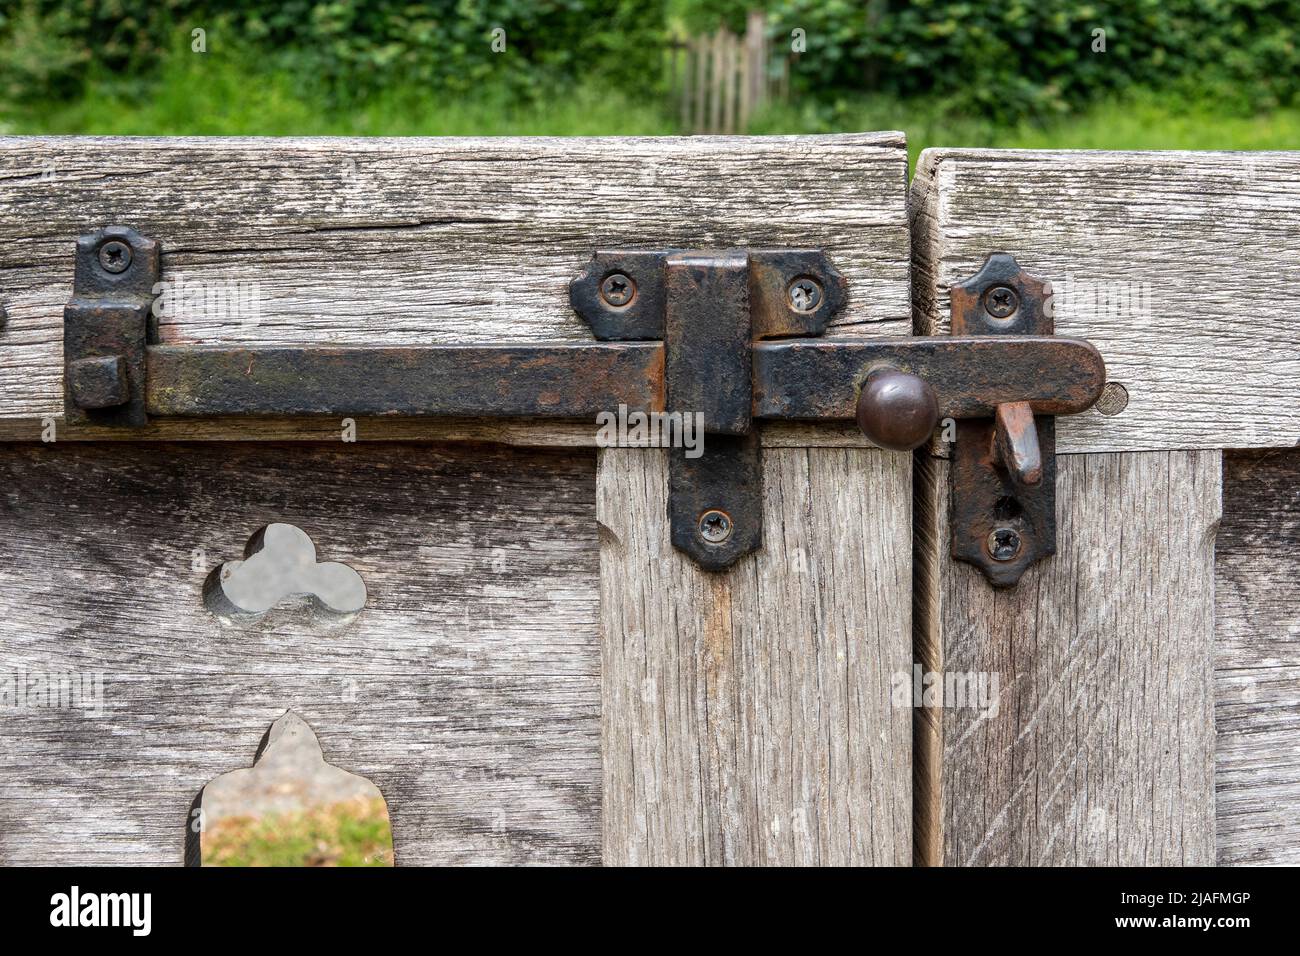 Iron gate drop latch on faded, distressed wooden gates Stock Photo